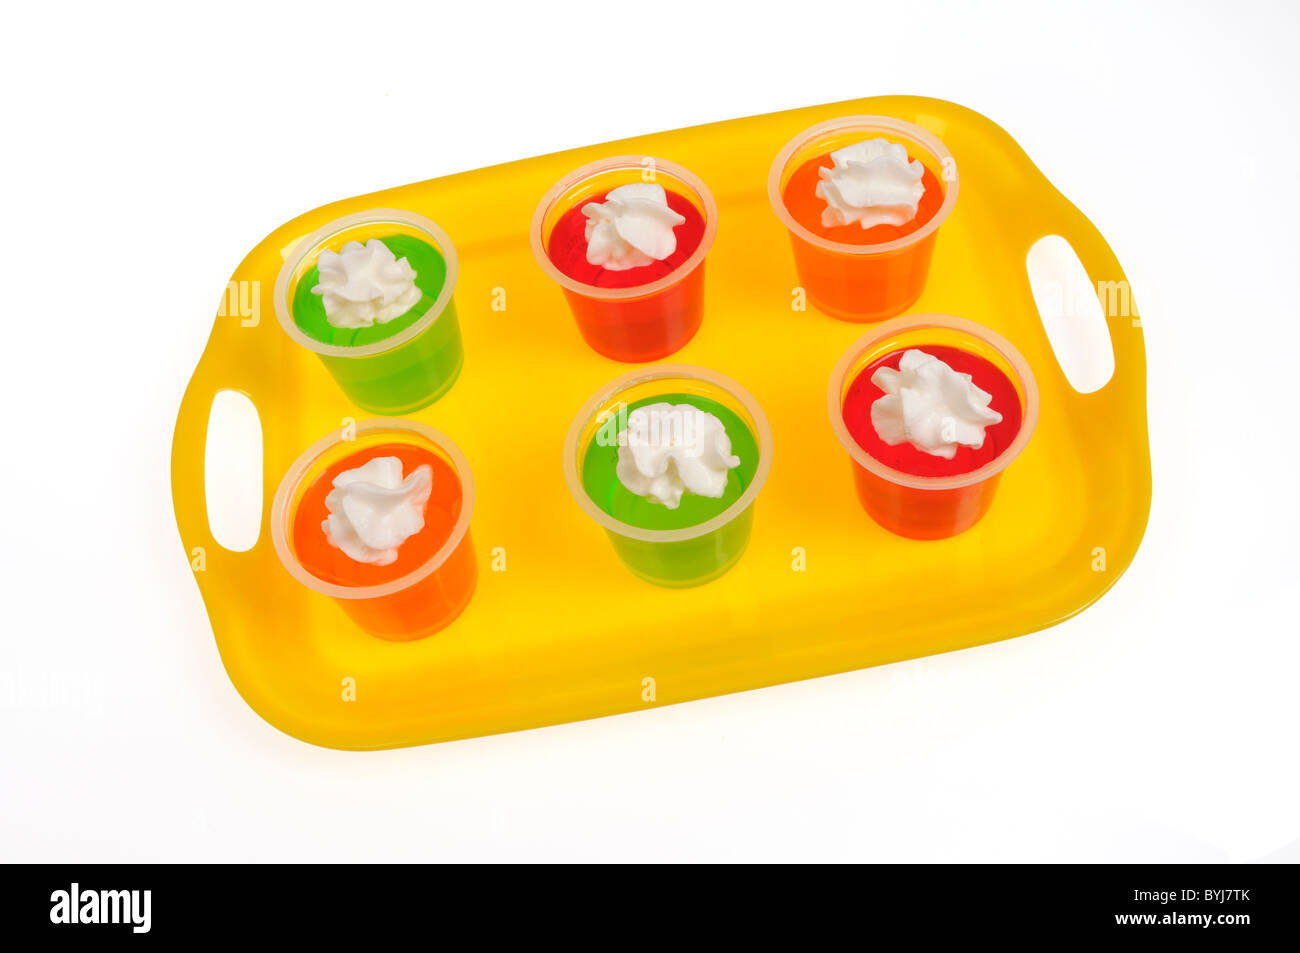 Colorful Jell-o pots with whipped cream topping on yellow tray on white background, cutout. Stock Photo